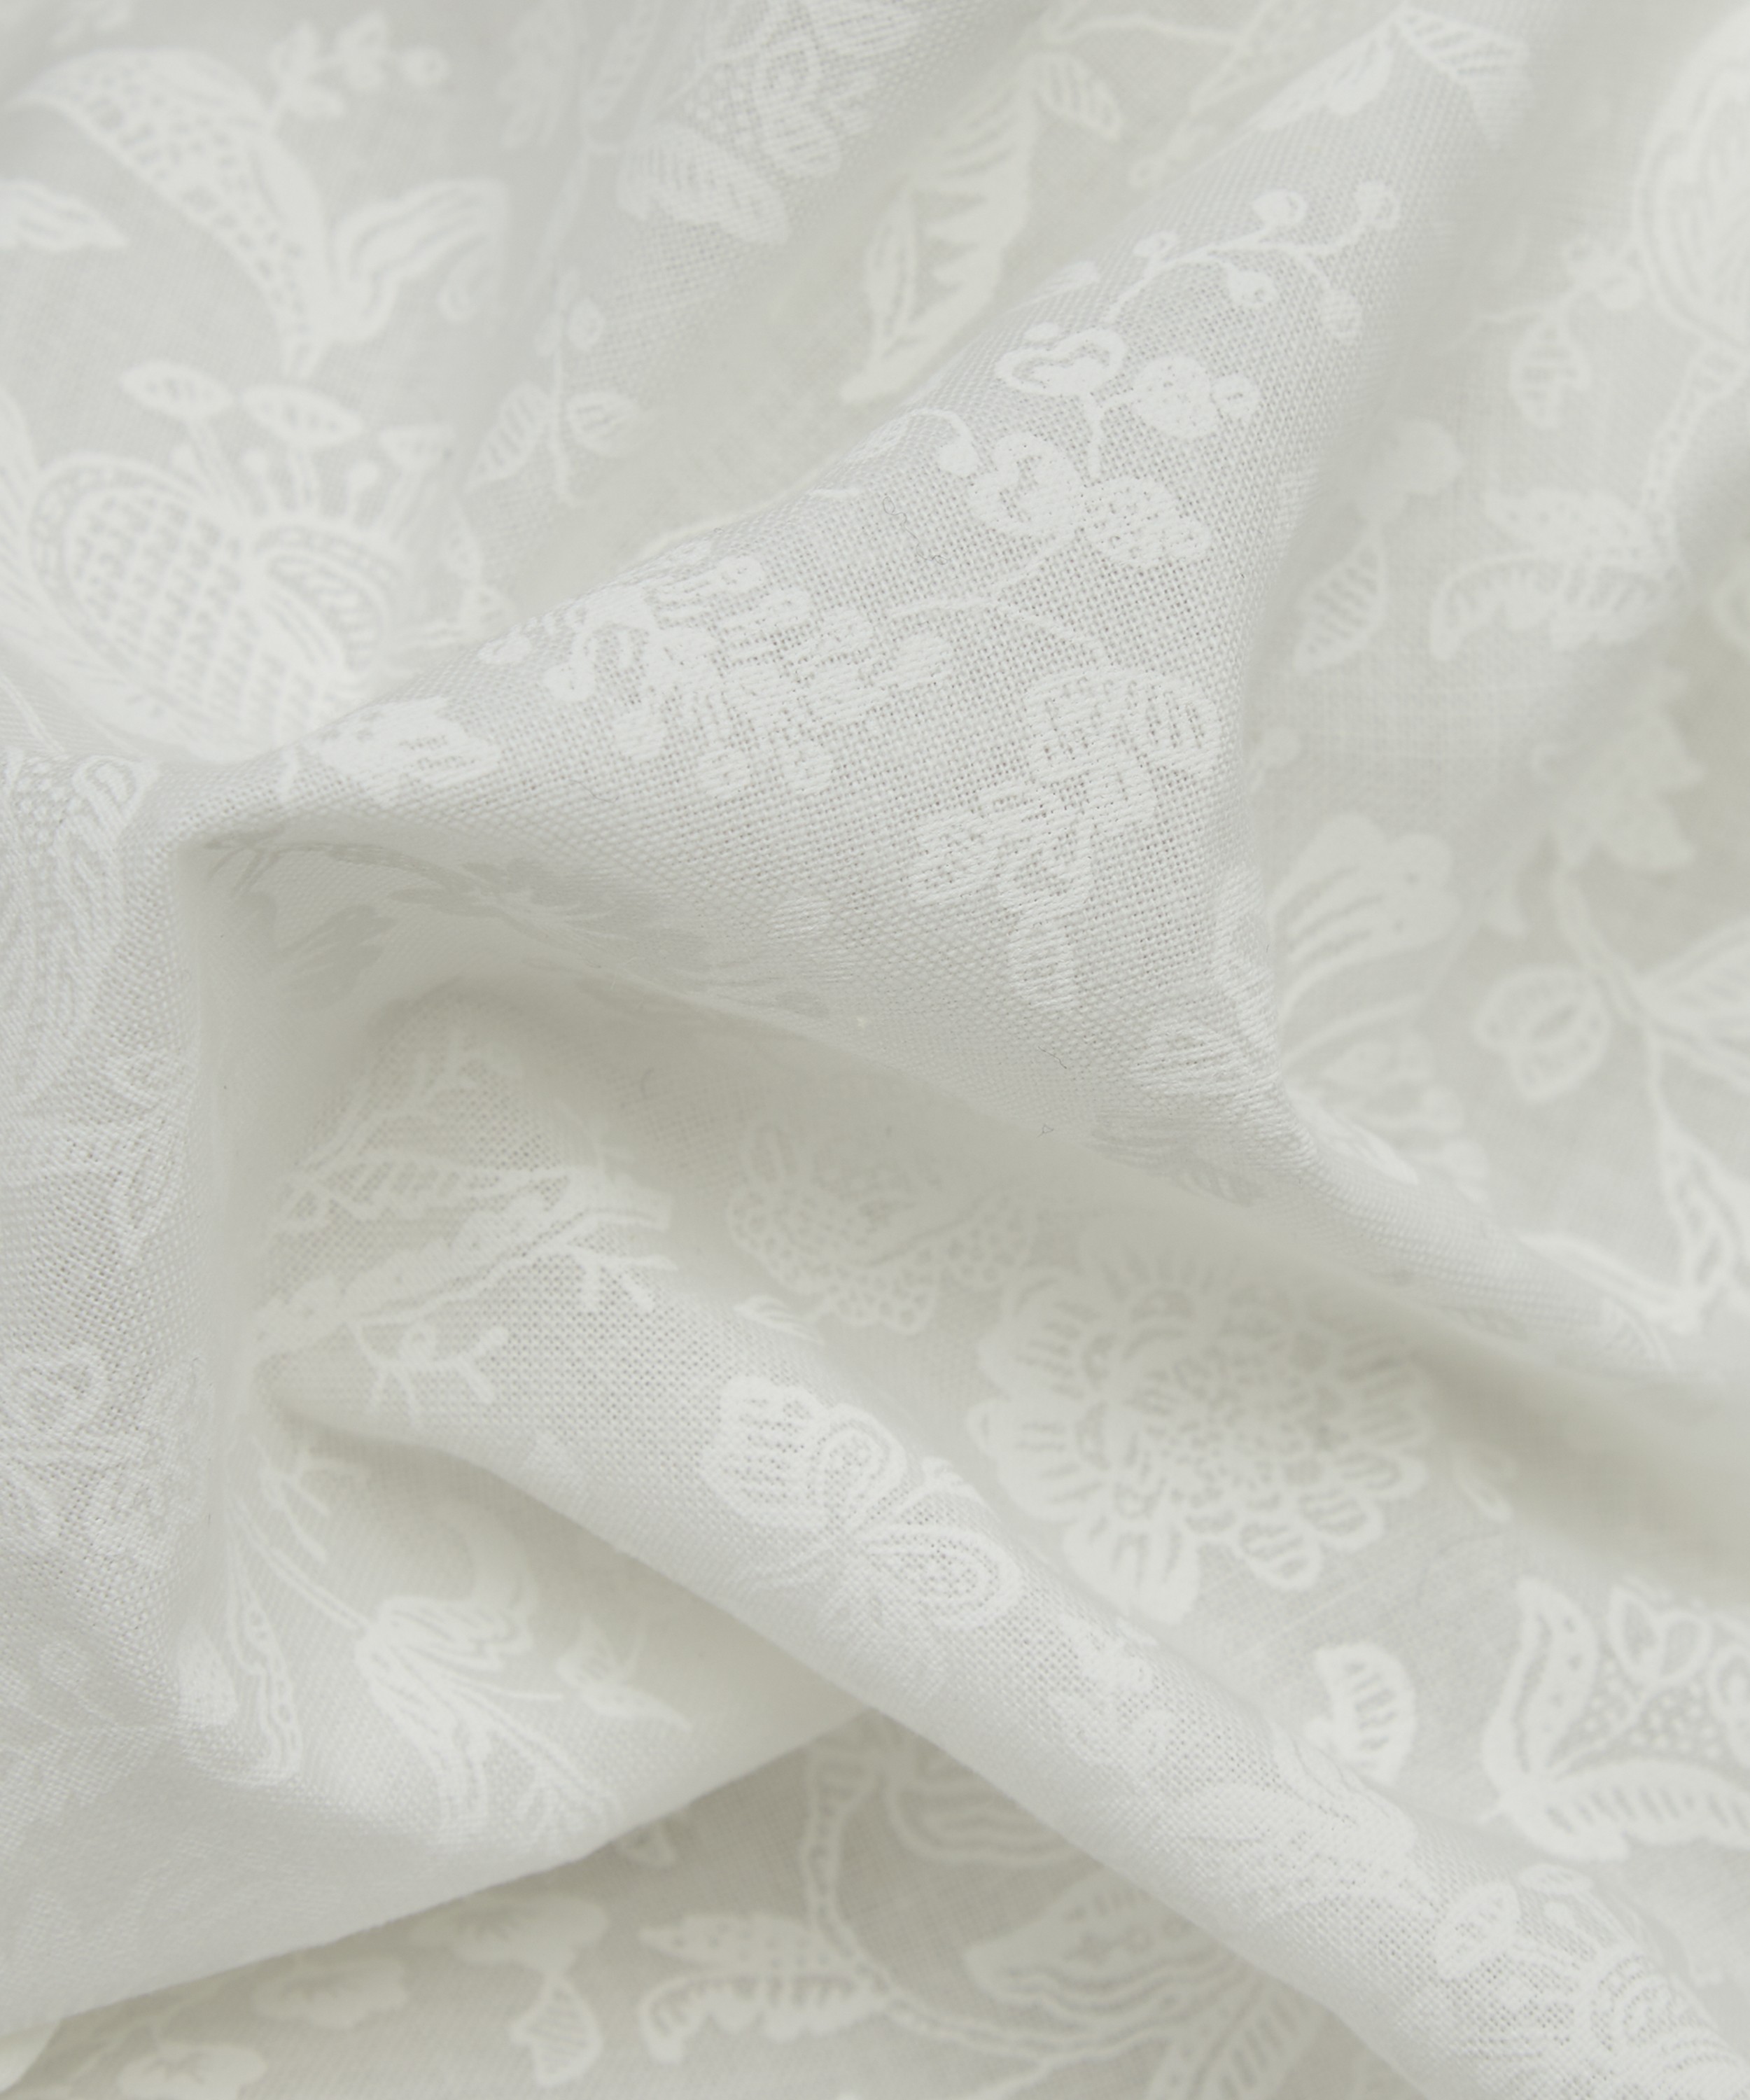 Black and White Floral Lace Fabric -  Hong Kong